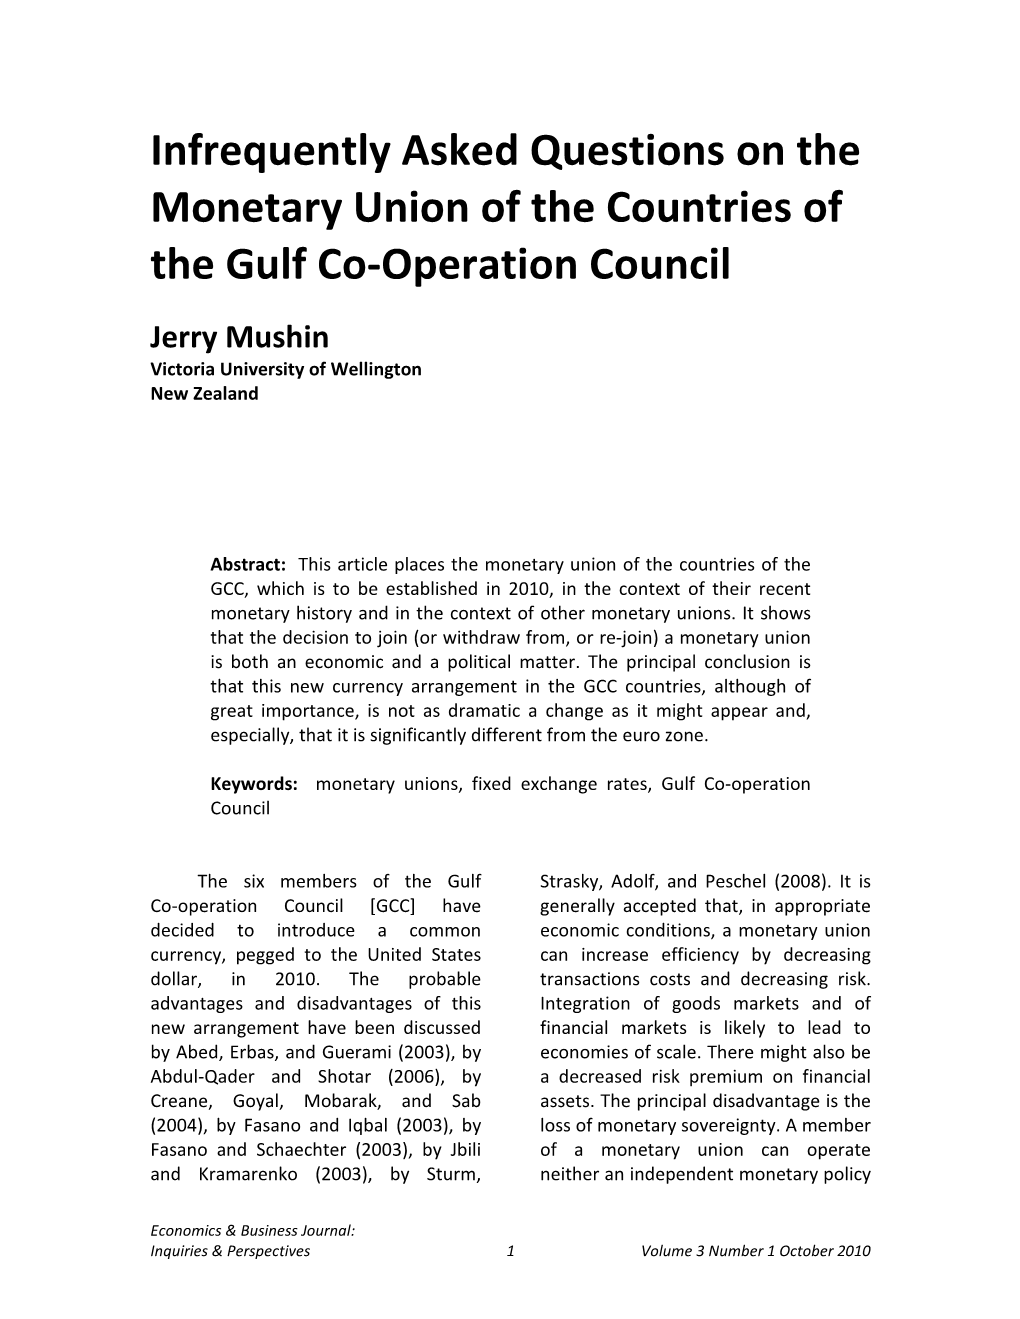 Infrequently Asked Questions on the Monetary Union of the Countries of the Gulf Co-Operation Council